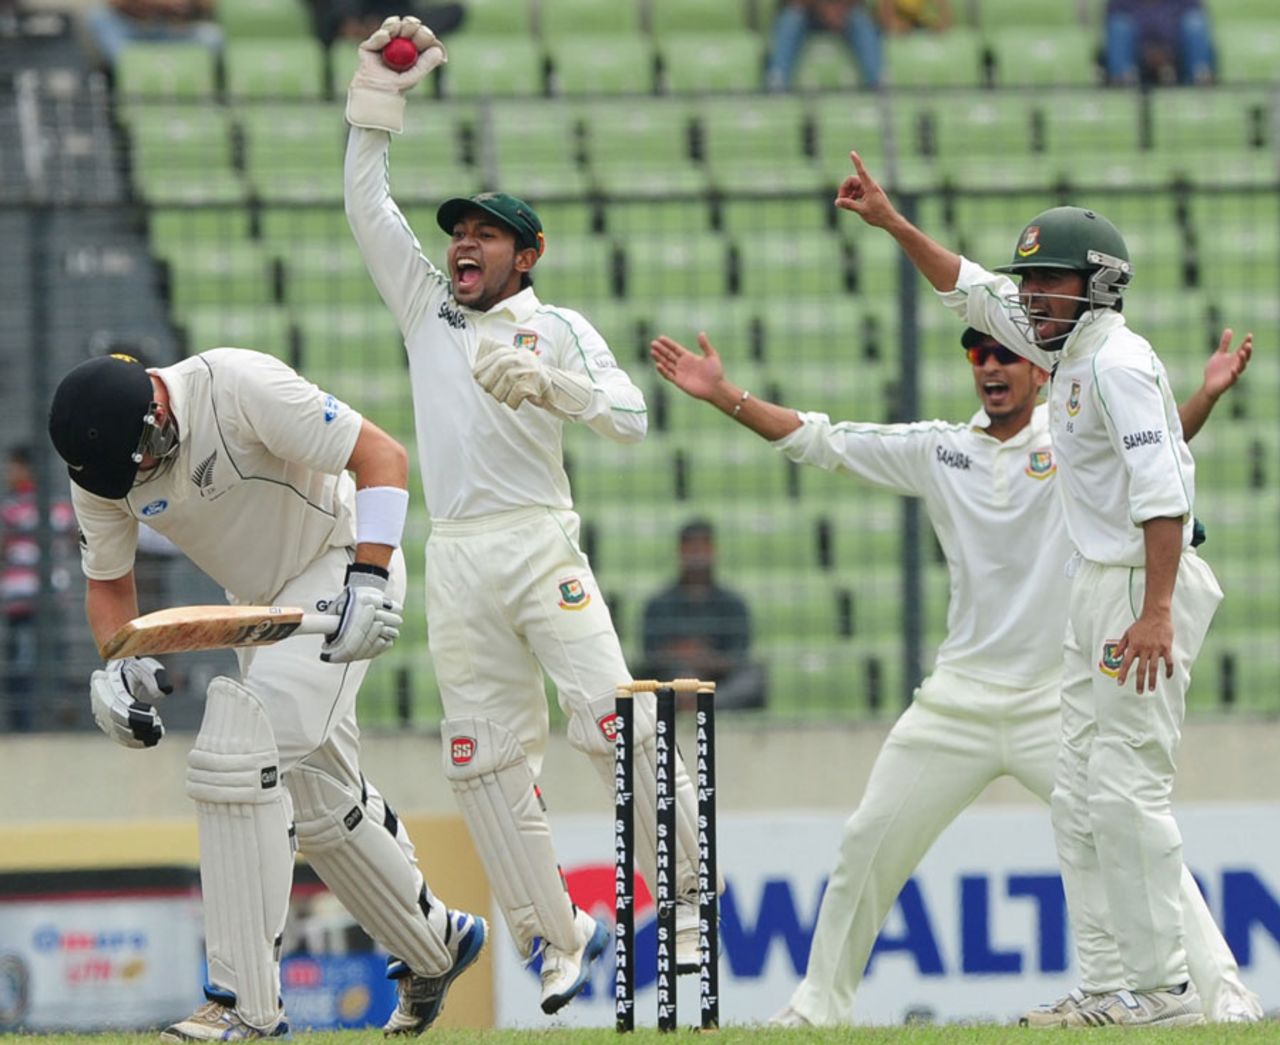 The Bangladeshi players go up for an appeal, Bangladesh v New Zealand, 2nd Test, 2nd day, Mirpur, October 22, 2013